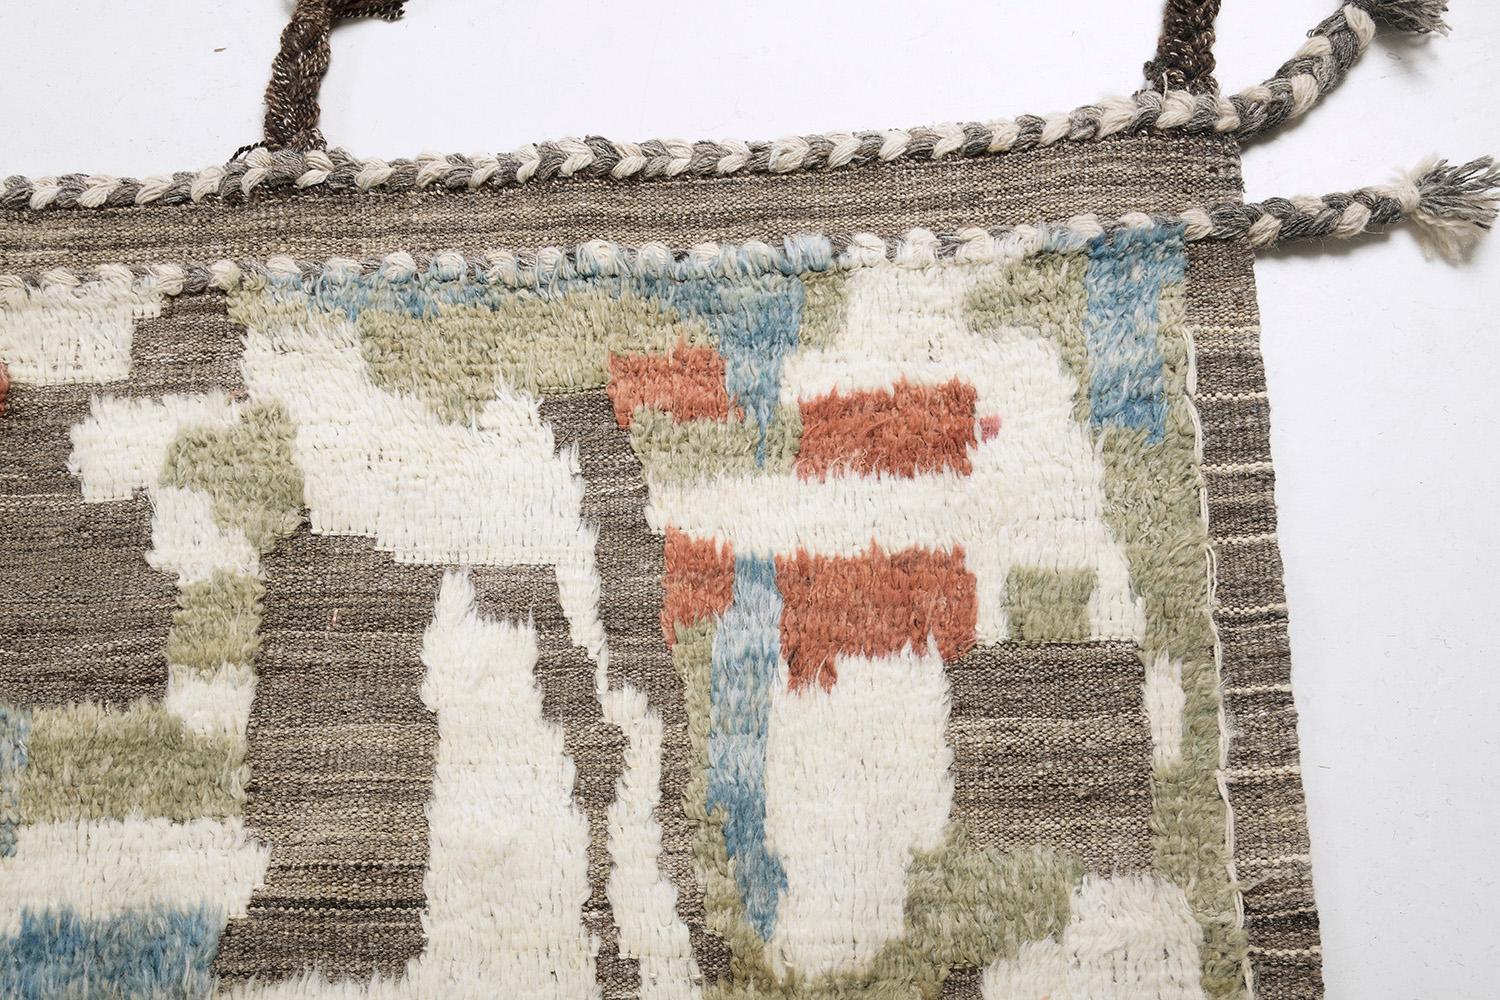 Berberis is an interplay between neutral tones and soothing earth colors with gold tones into a modern-day interpretation of the Moroccan world. This rug's play of textures, linework, and simplicity is what makes the Atlas Collection so unique and